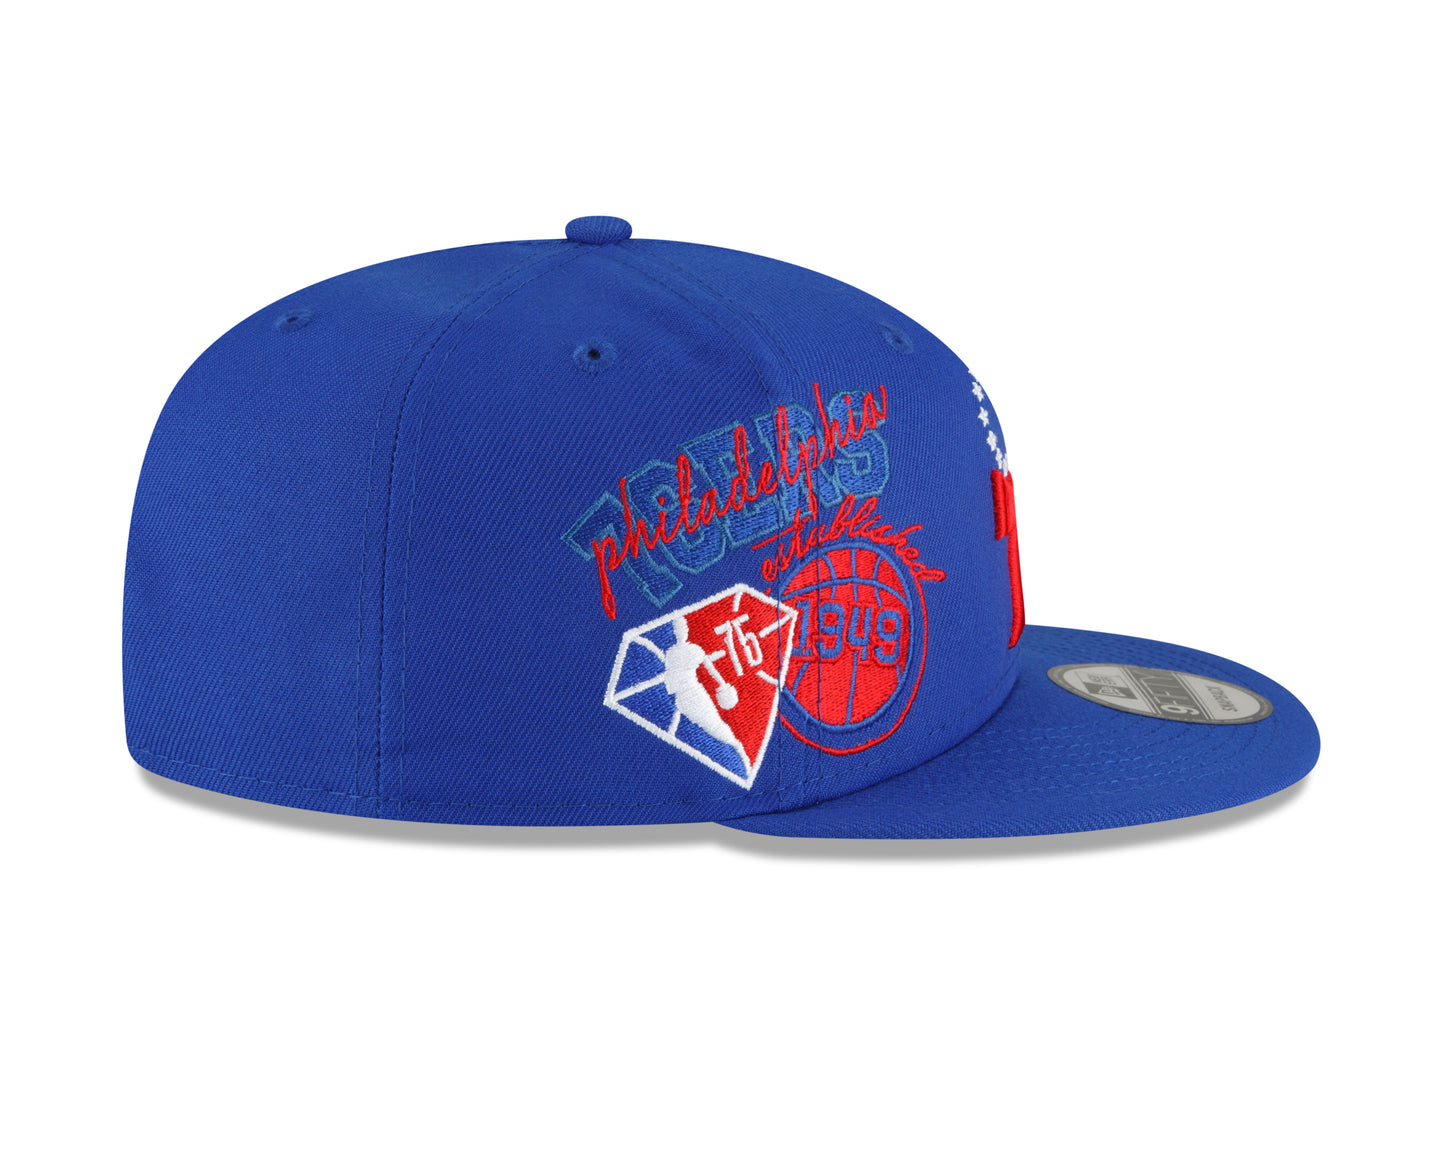 Philadelphia 76ers Authentic Back Half Series 9FIFTY Snap Back Hat - Blue